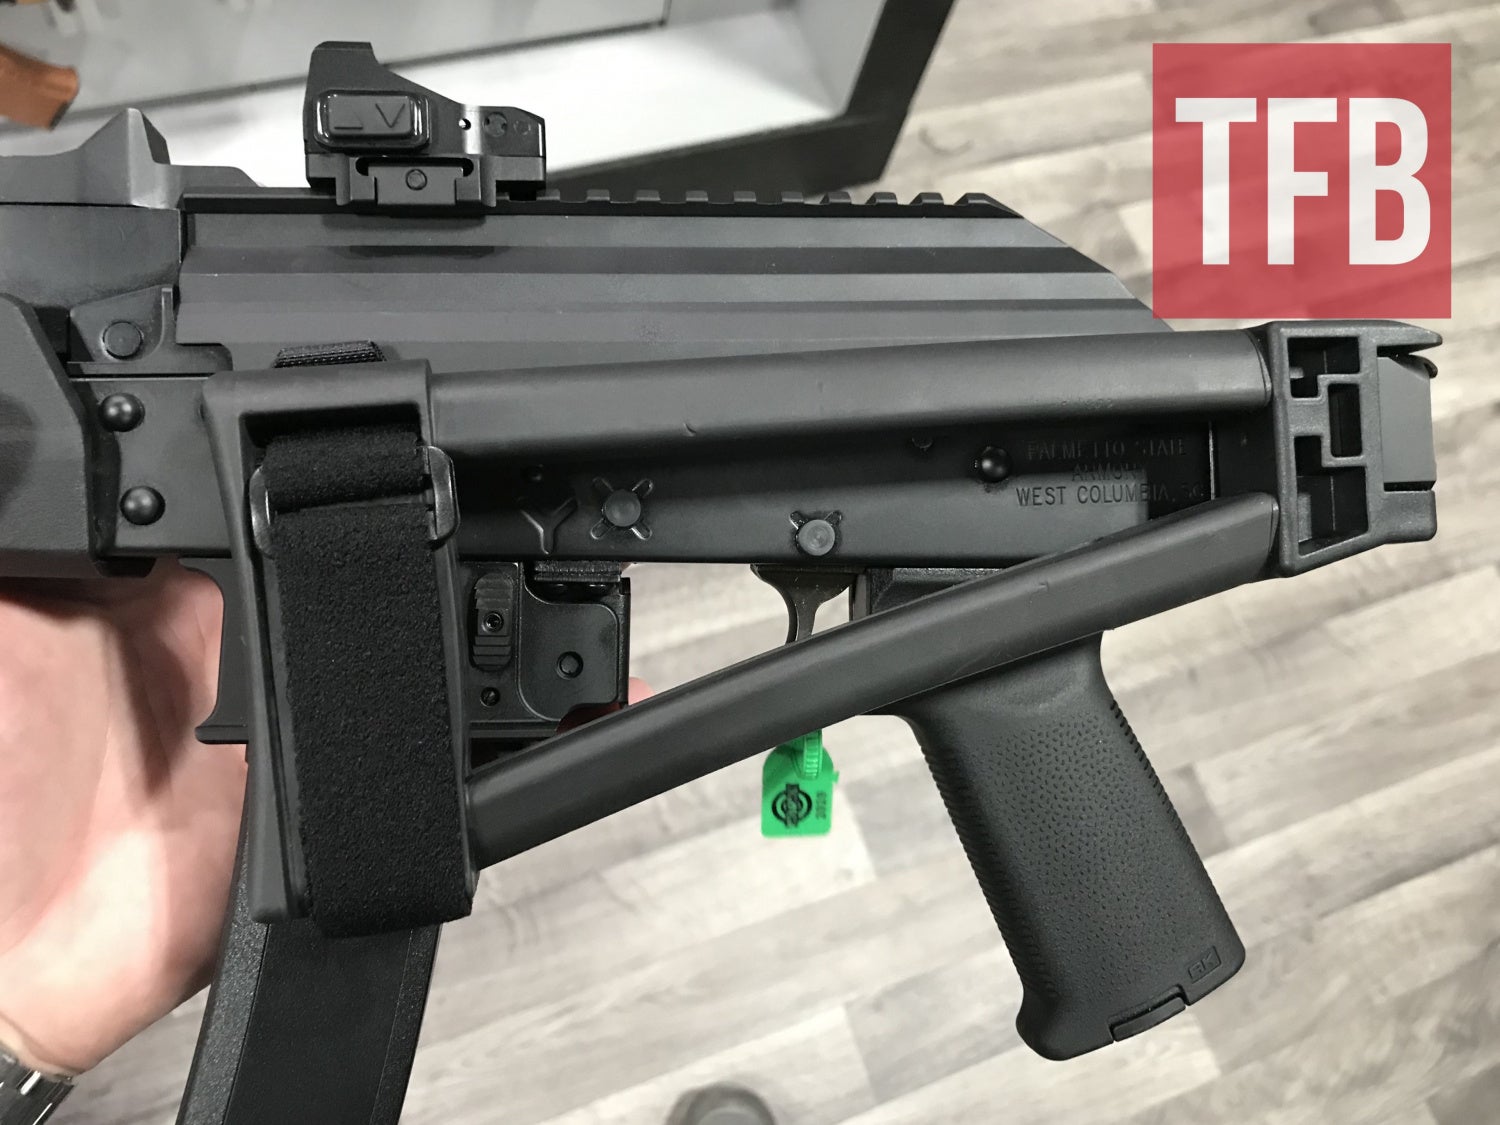 SB Tactical has announced they will be selling their AK triangle brace as a...